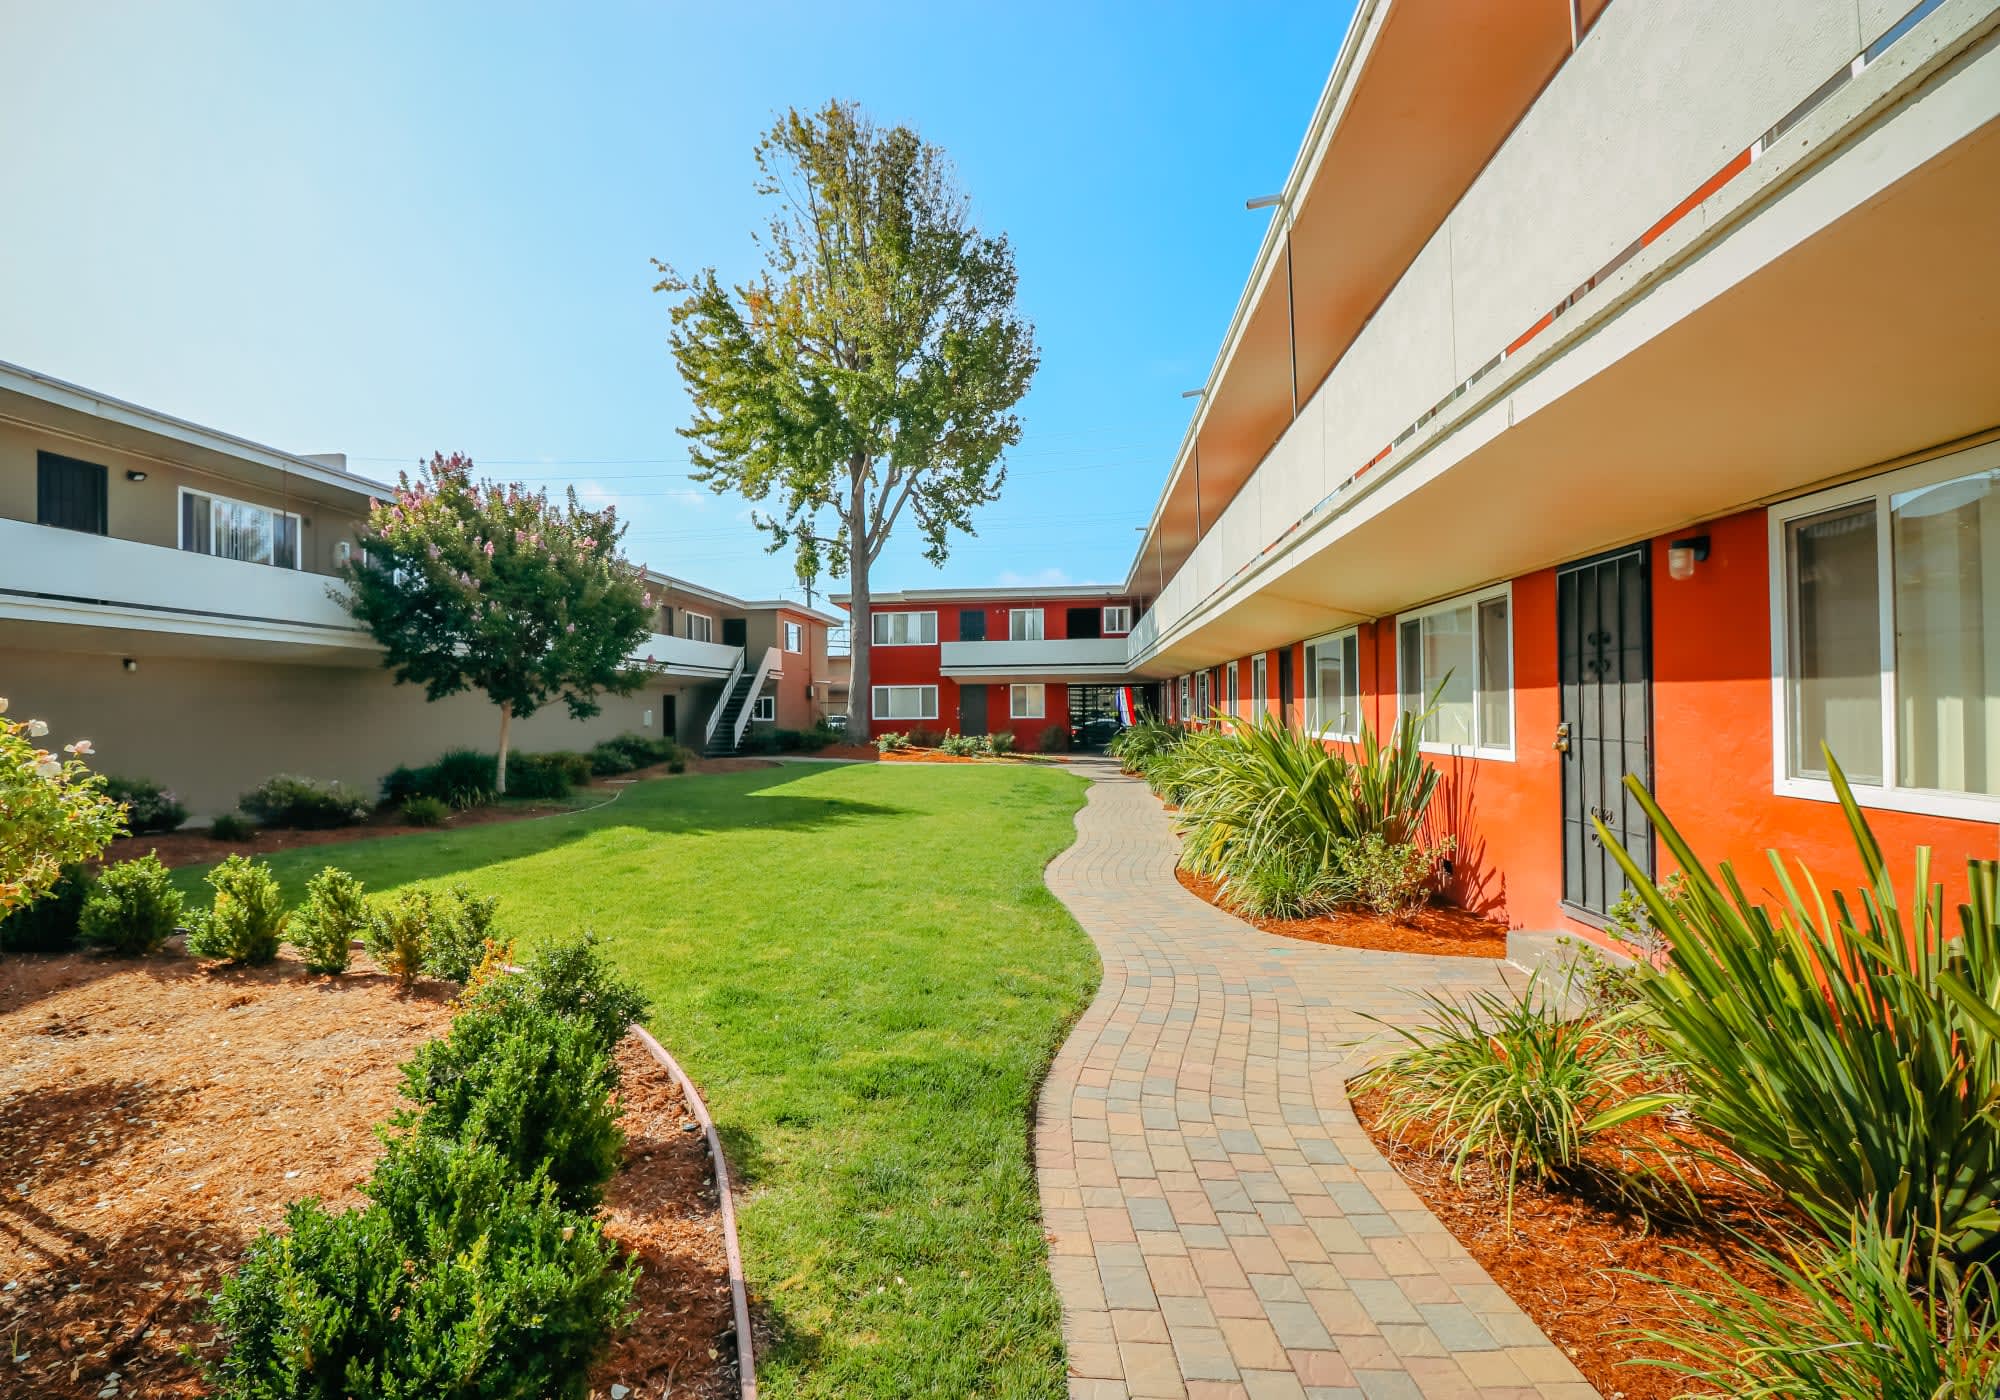 Contact Us at Garden Court Apartments in Alameda, California